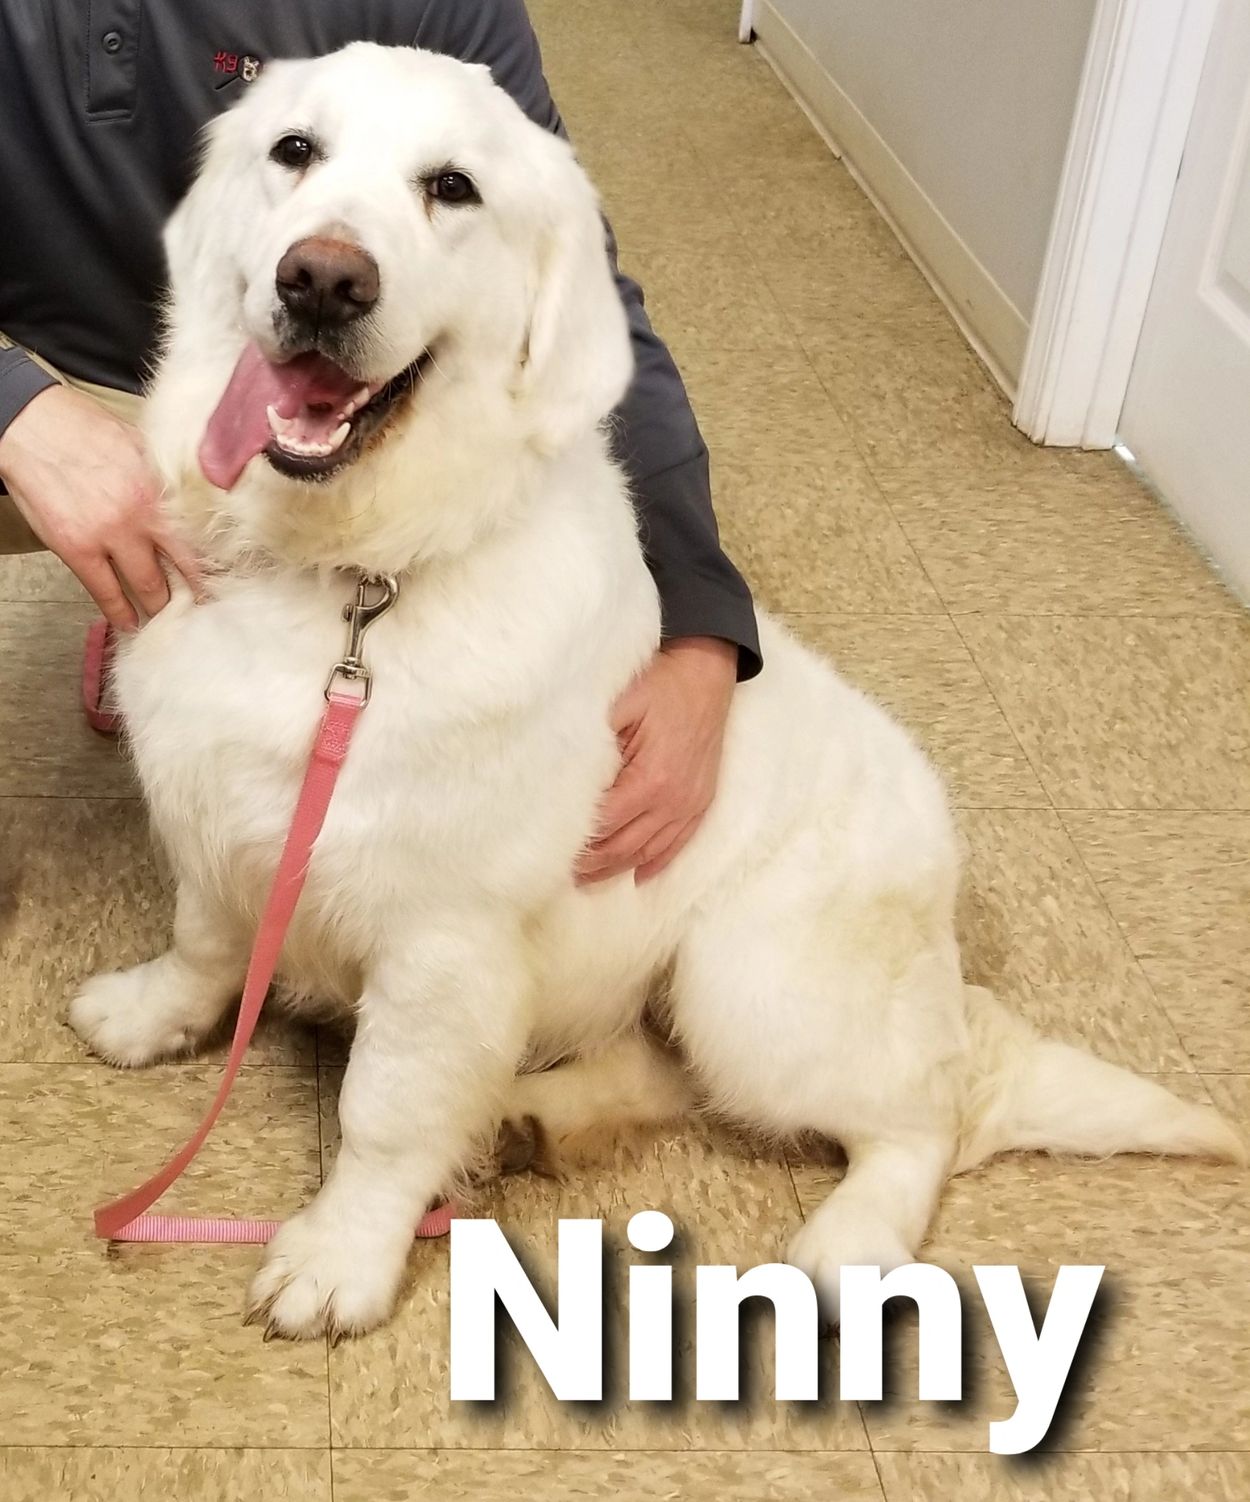 Ninny is our beautiful English Golden Retriever.